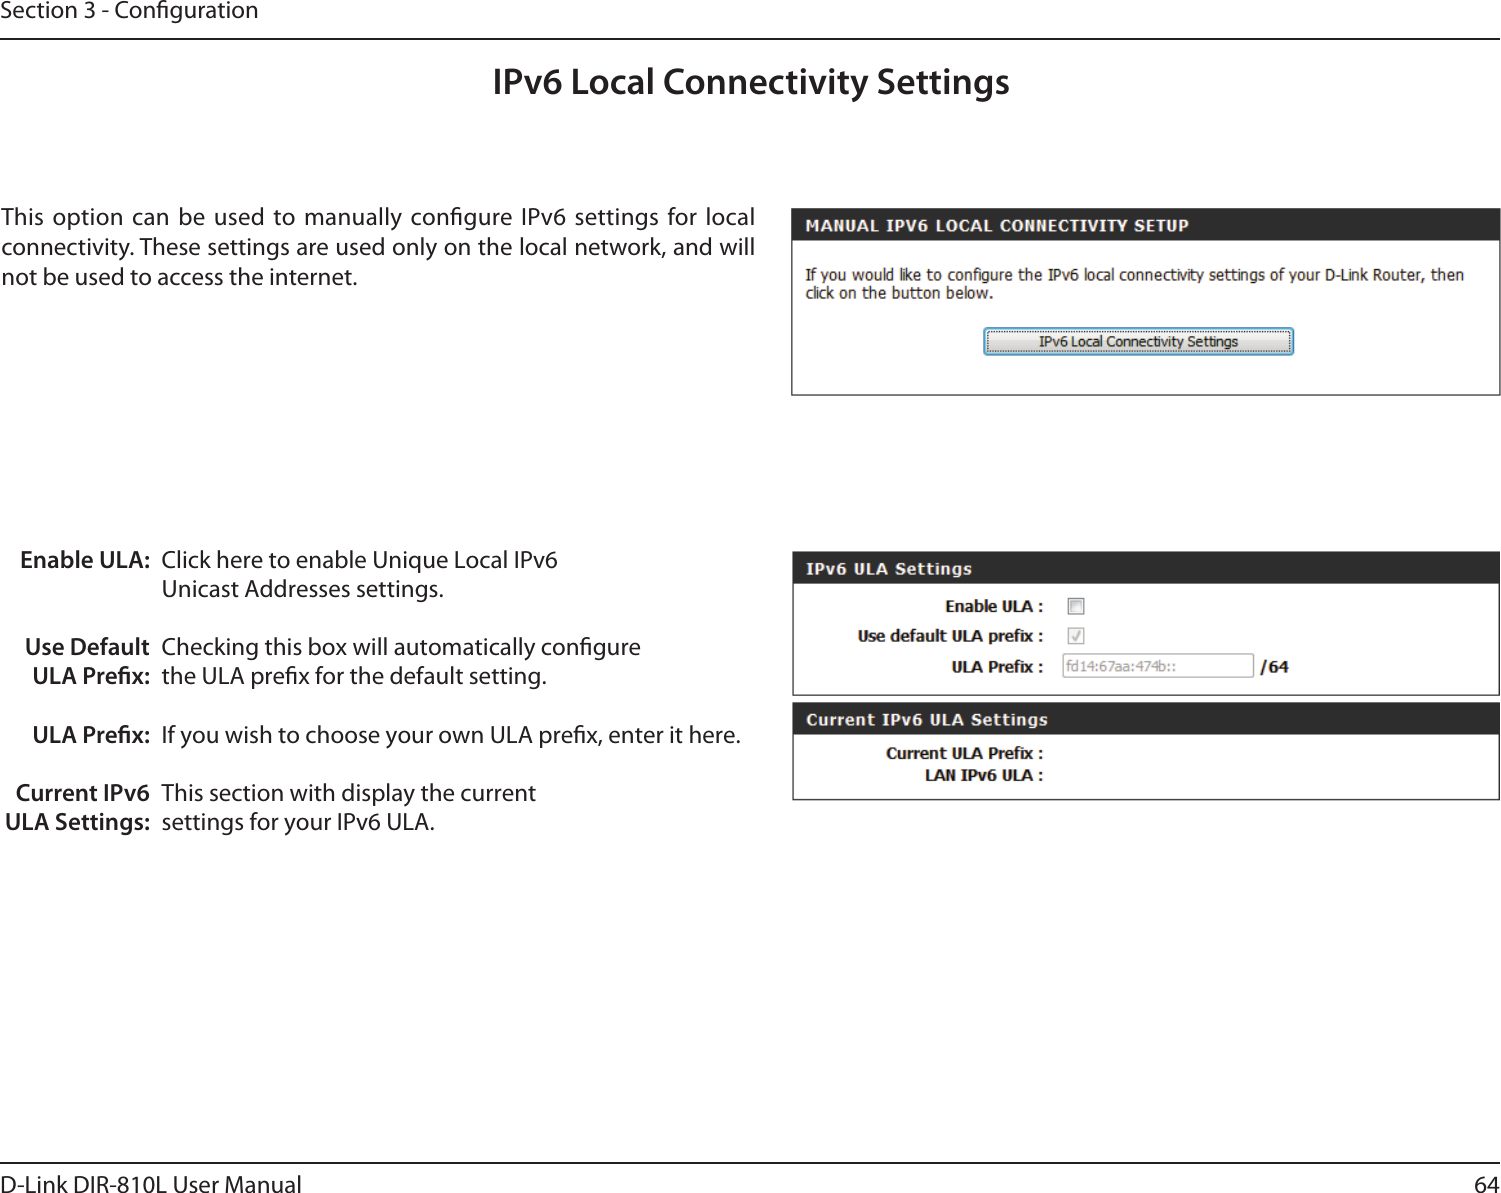 64D-Link DIR-810L User ManualSection 3 - CongurationIPv6 Local Connectivity SettingsEnable ULA:Use Default ULA Prex:ULA Prex:Current IPv6 ULA Settings:Click here to enable Unique Local IPv6 Unicast Addresses settings.Checking this box will automatically congure the ULA prex for the default setting.If you wish to choose your own ULA prex, enter it here.This section with display the current settings for your IPv6 ULA.This option can  be  used to  manually congure IPv6 settings  for local connectivity. These settings are used only on the local network, and will not be used to access the internet.